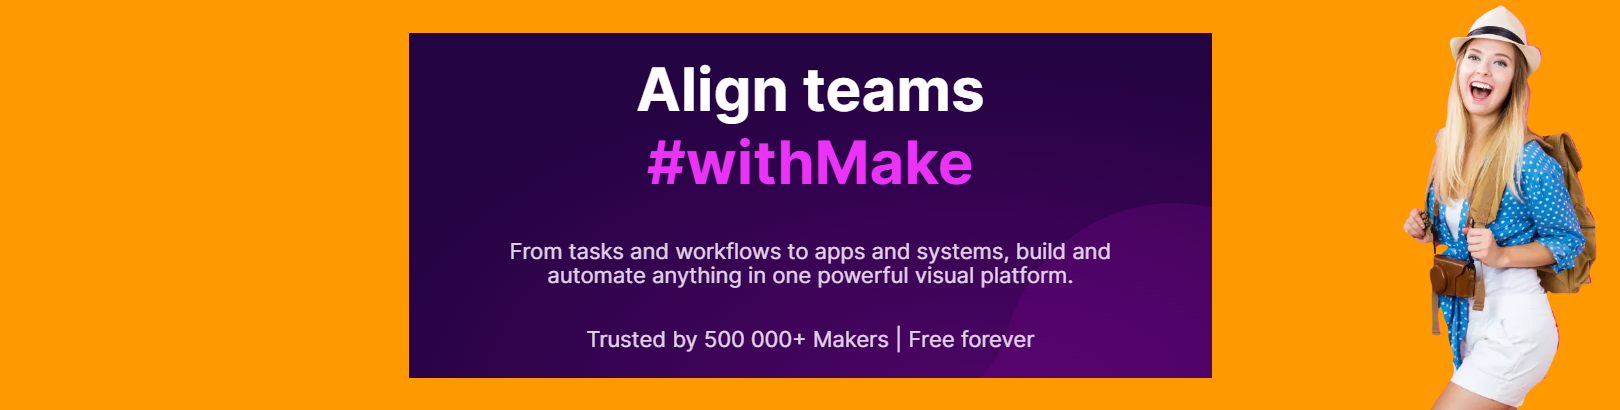 From tasks and workflows to apps and systems, build and automate anything in one powerful visual platform.